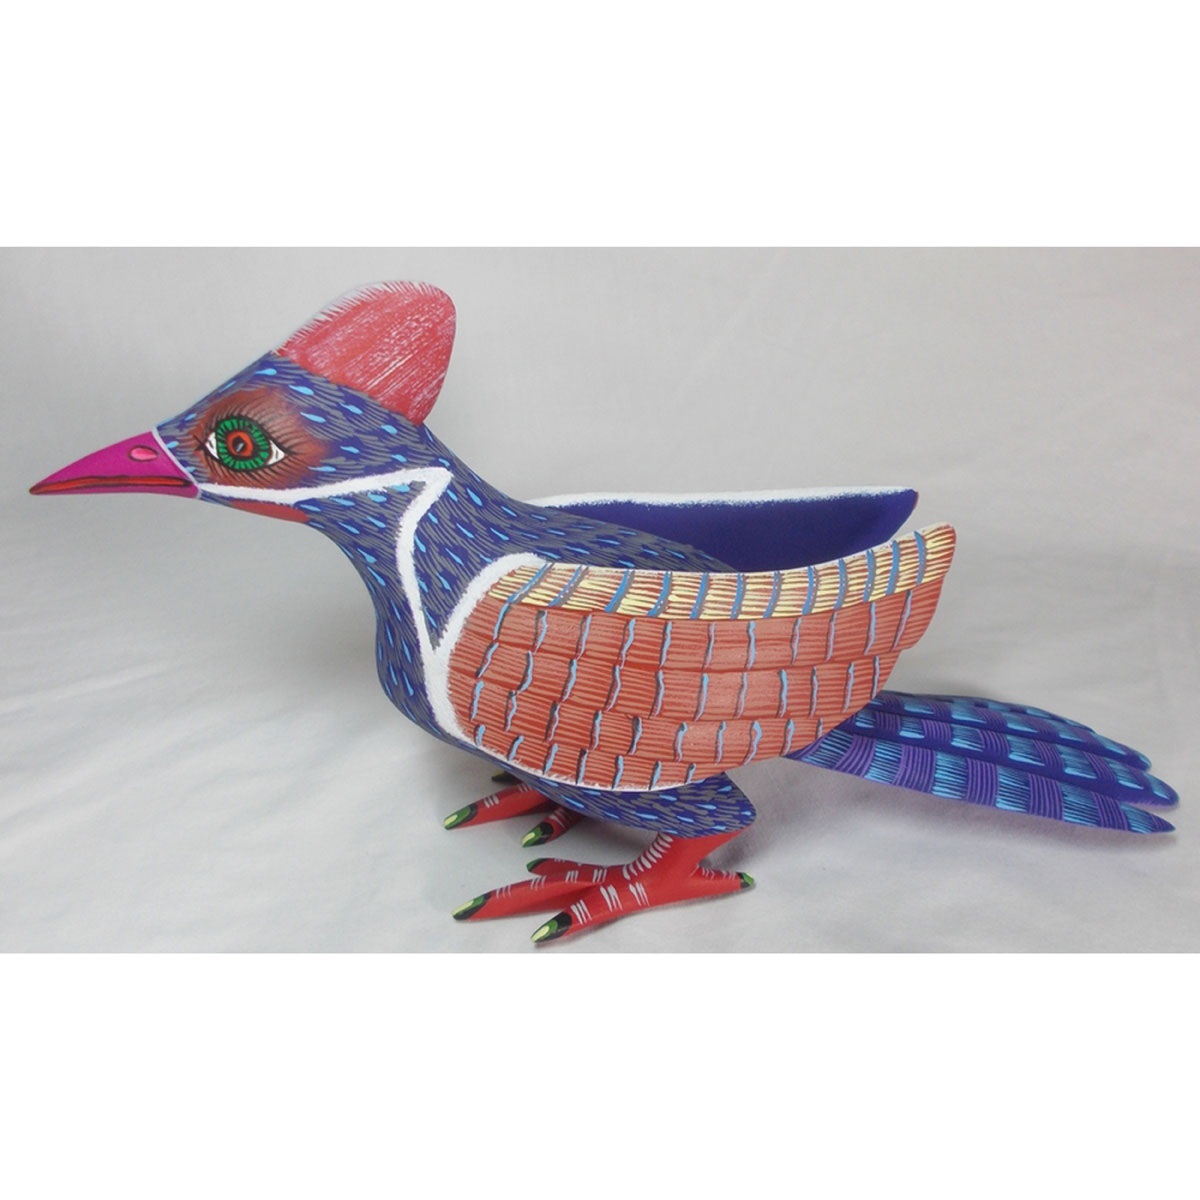 Oaxacan Woodcarving by Damian & Beatriz Morales